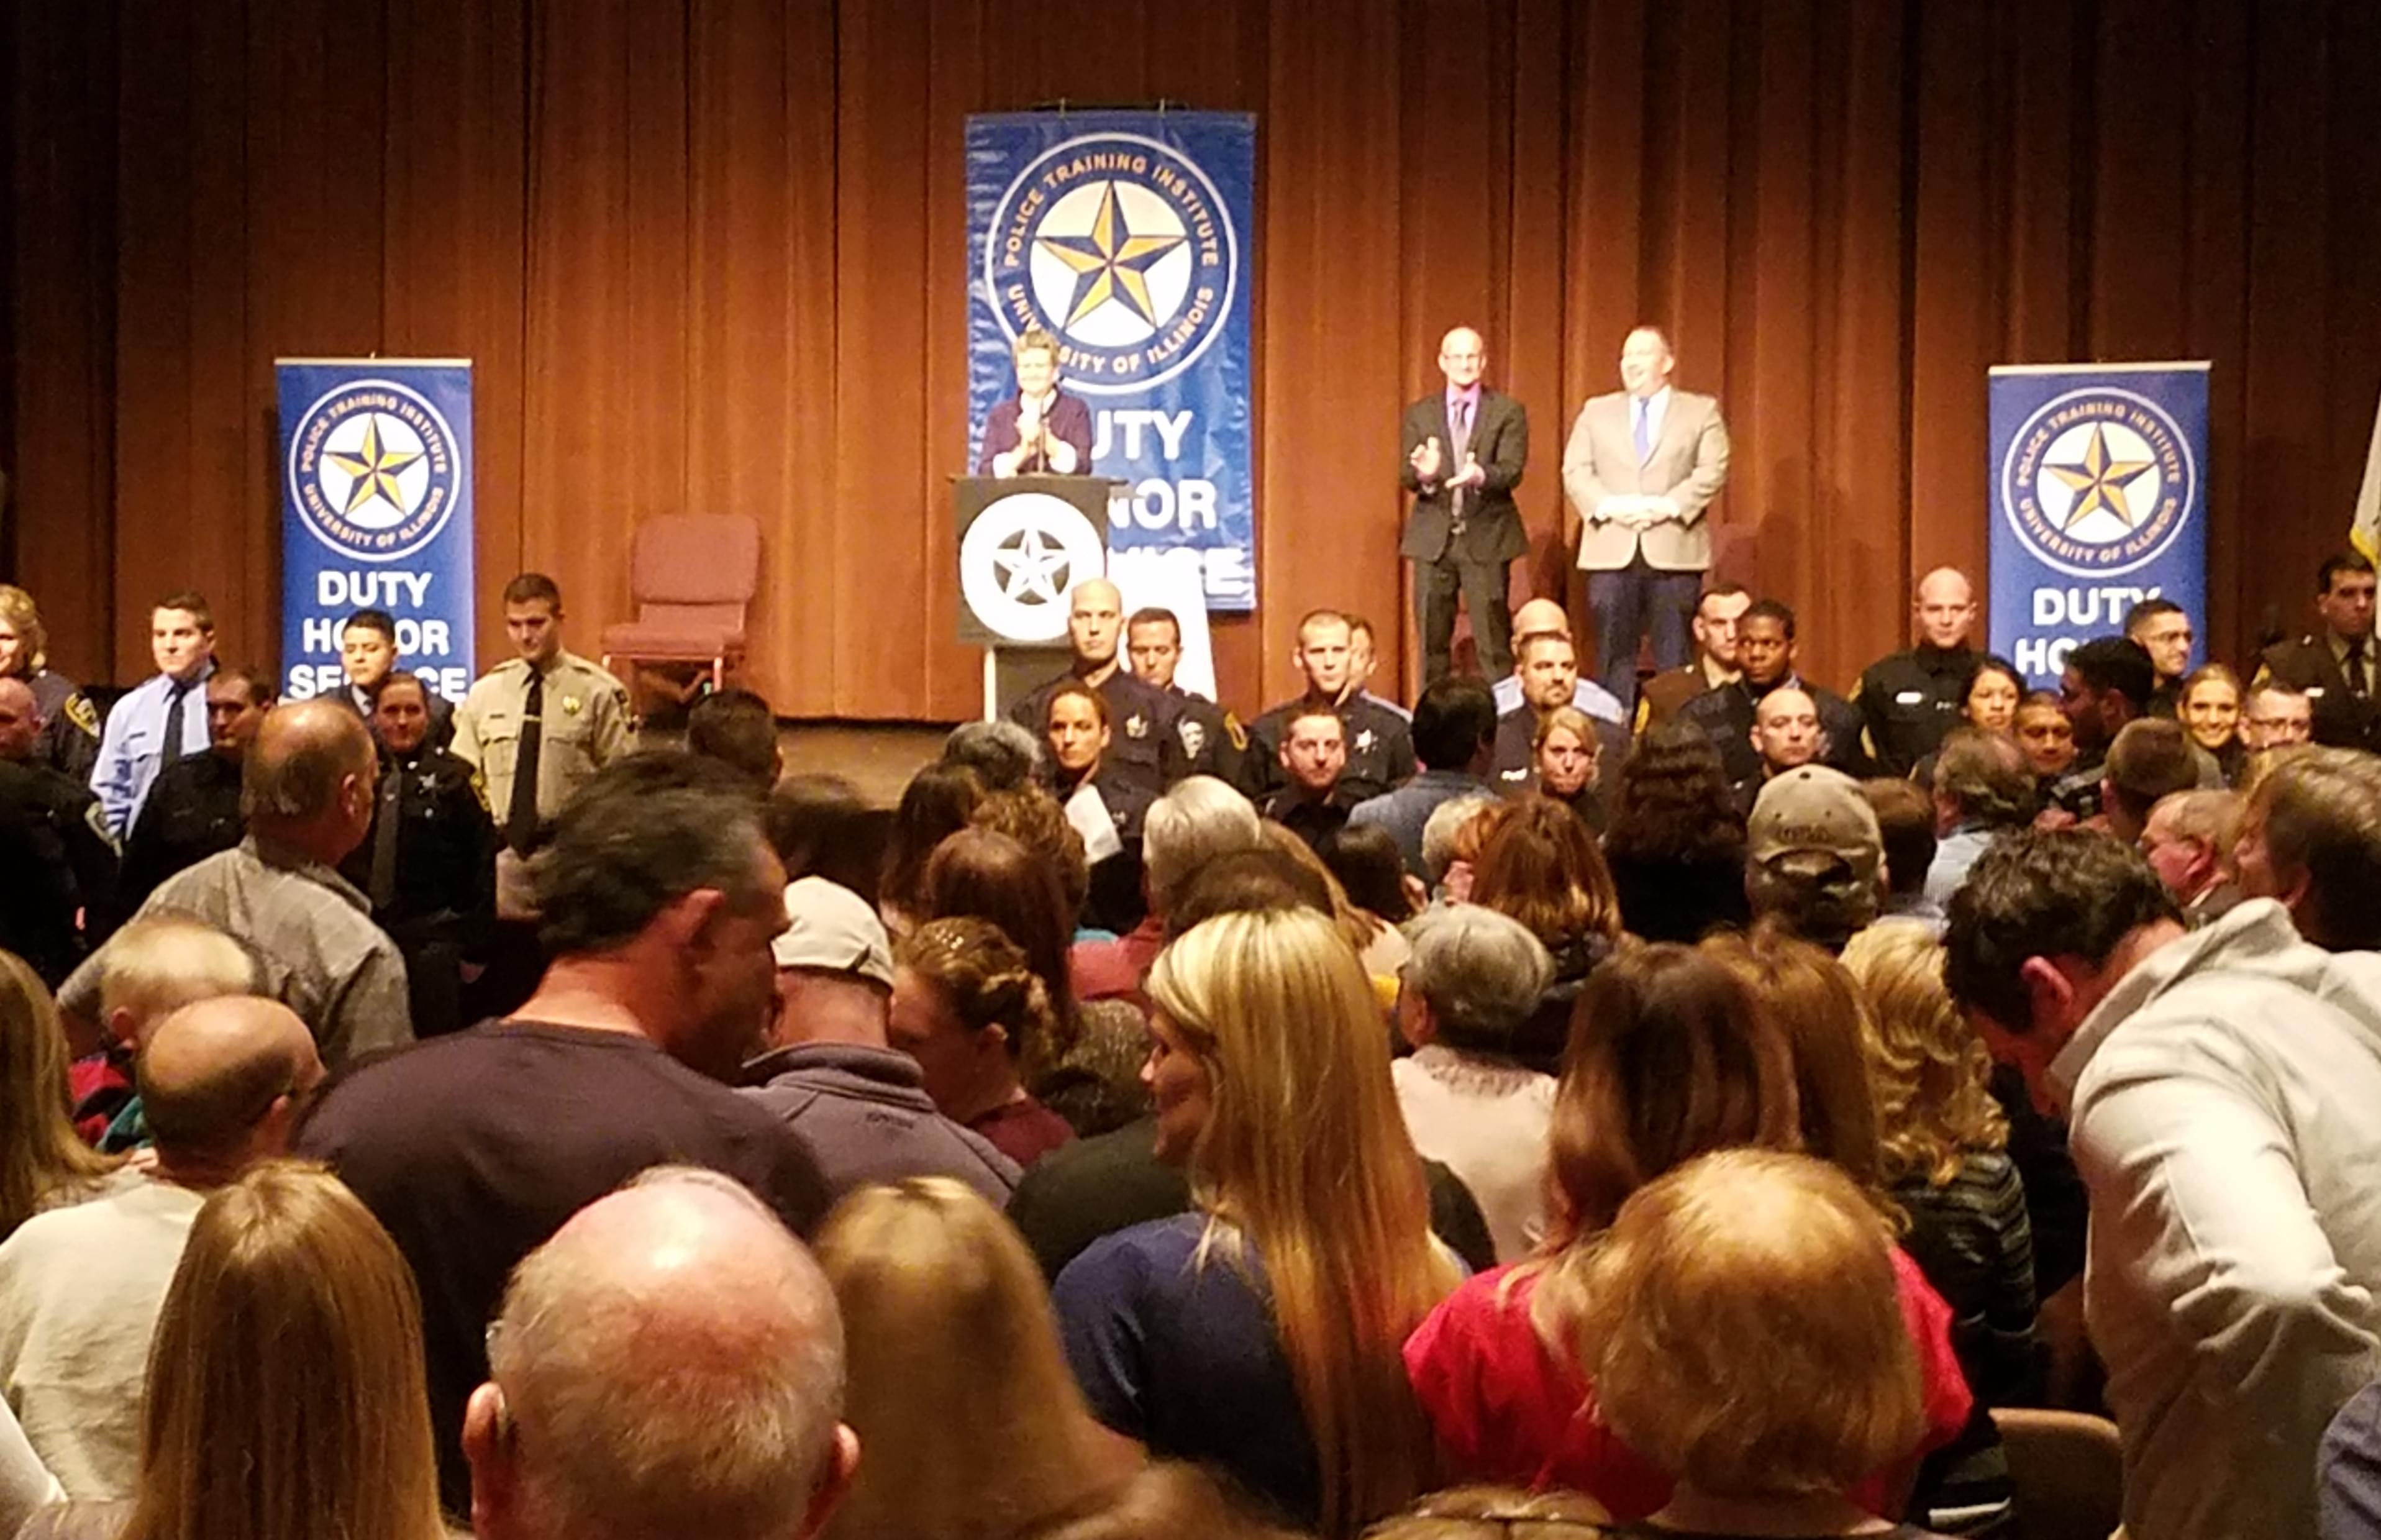 An dueince applauds the graduating class at the graduation ceremony for the University of Illinois Police Training Institute.